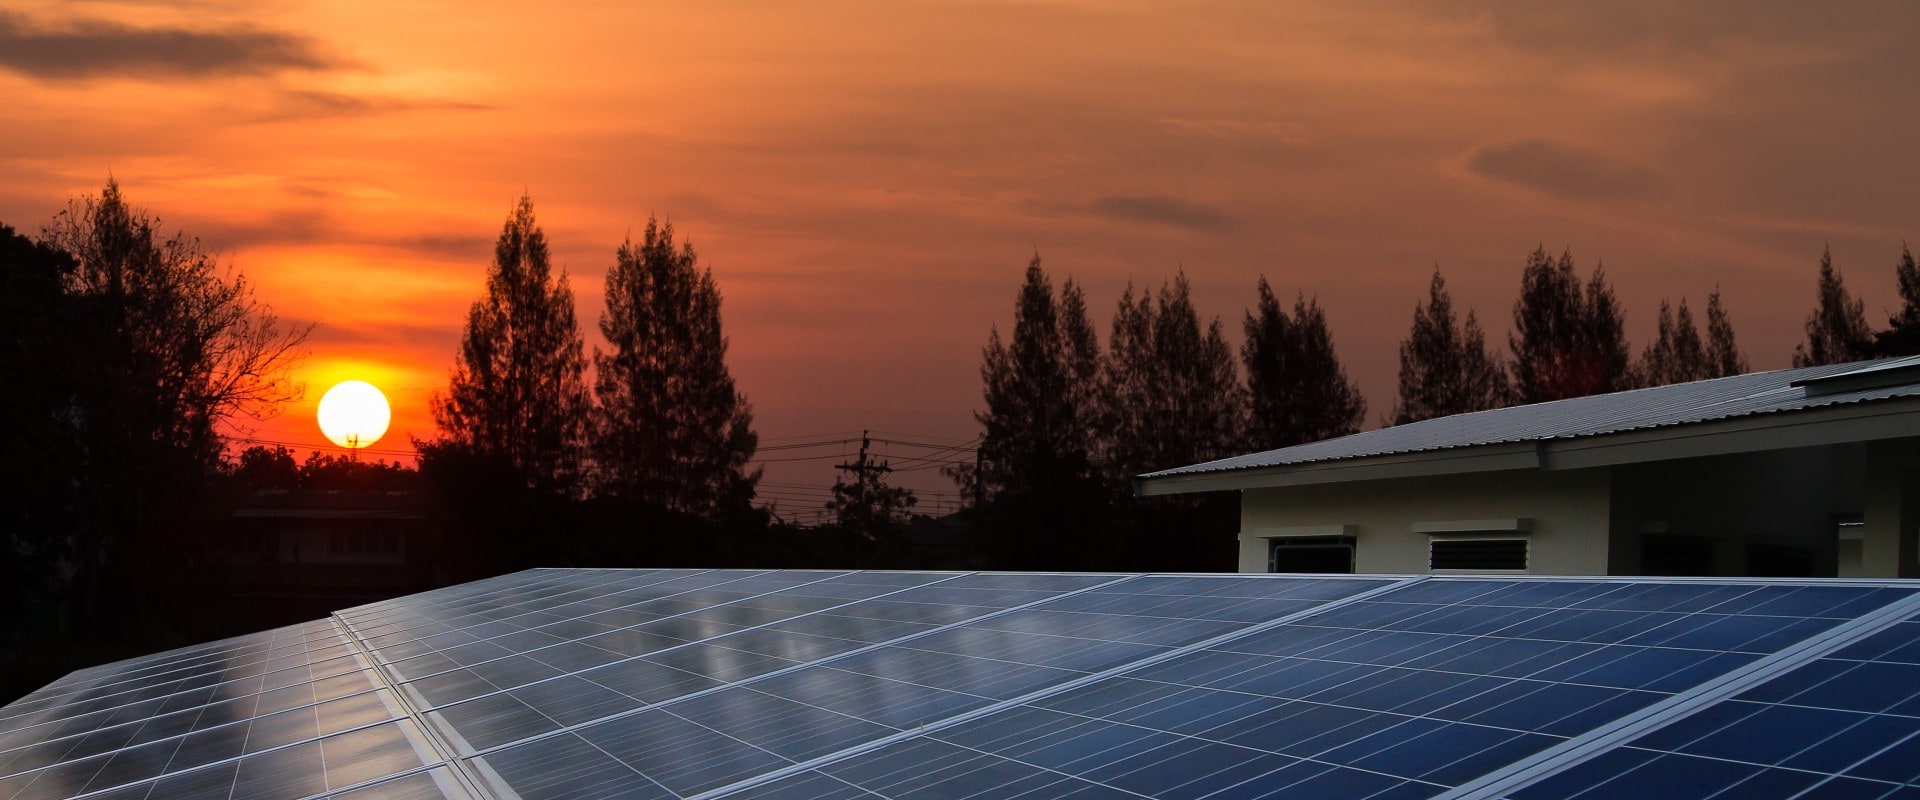 What are 3 pros and 3 cons to solar power?